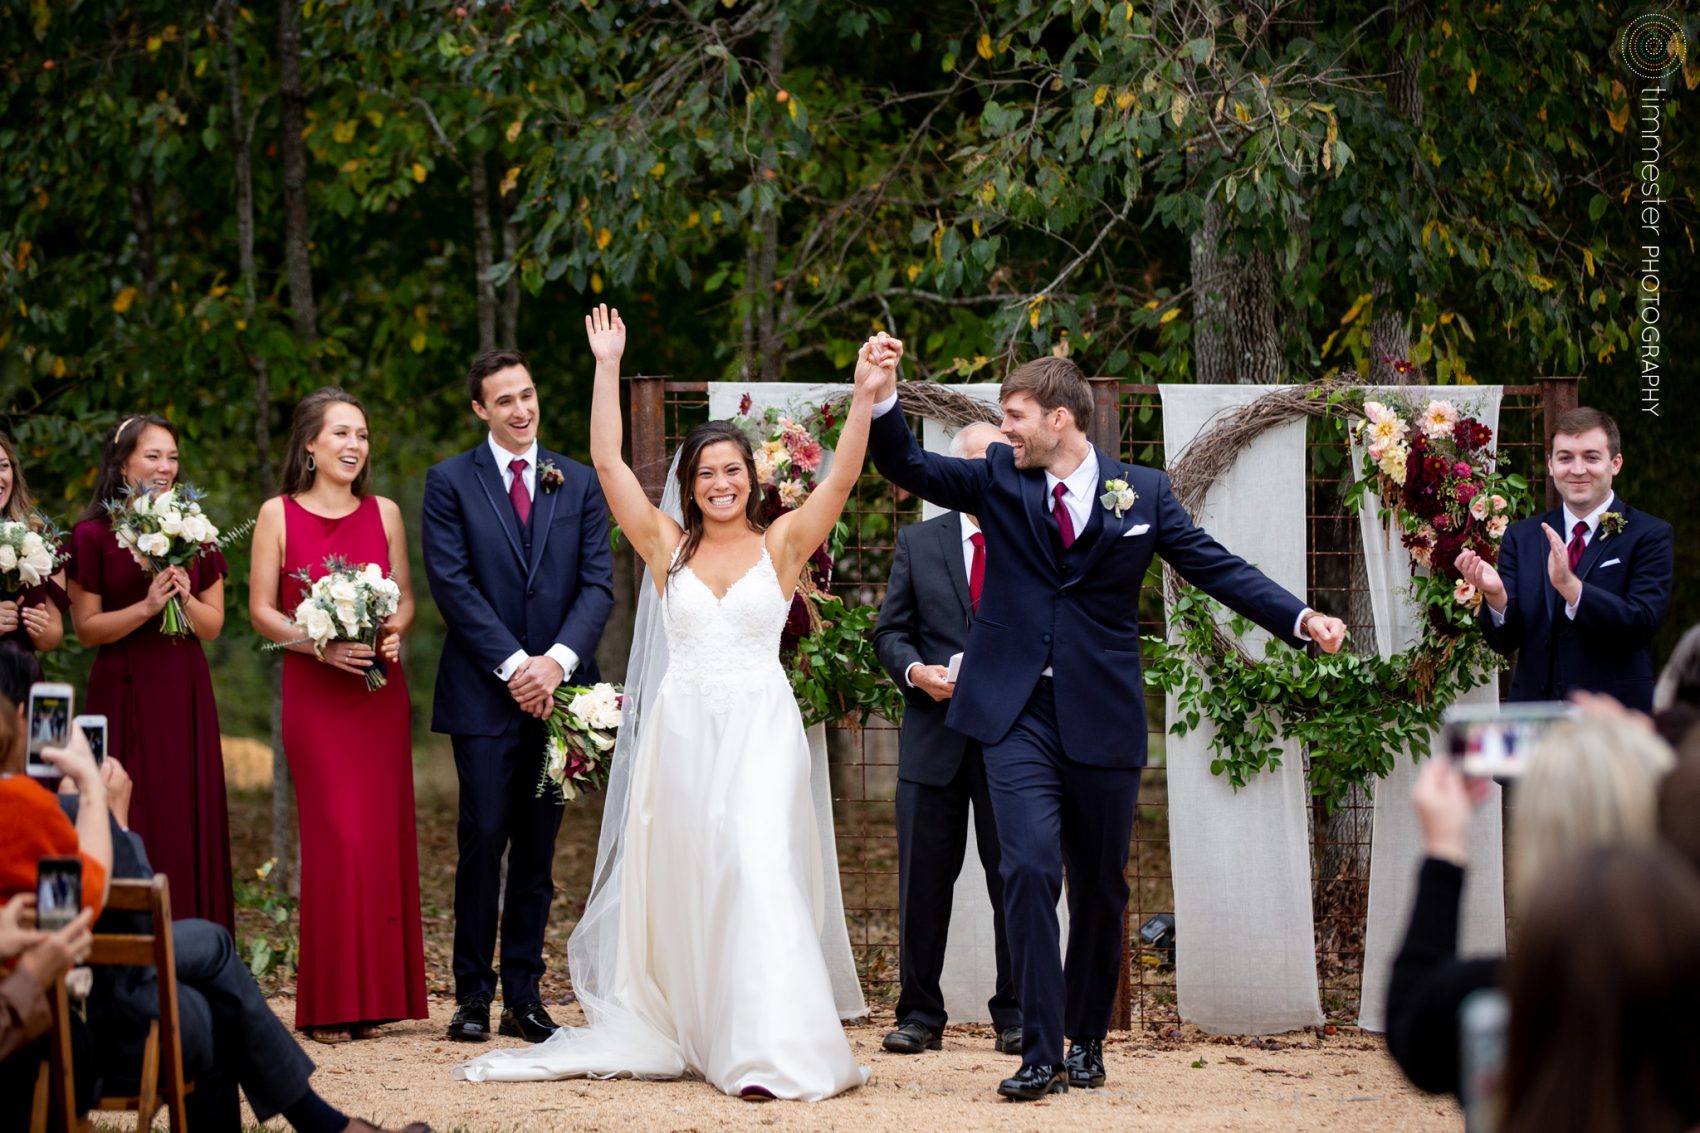 A bride and groom just married after their ceremony at Sassafras Fork Farm!